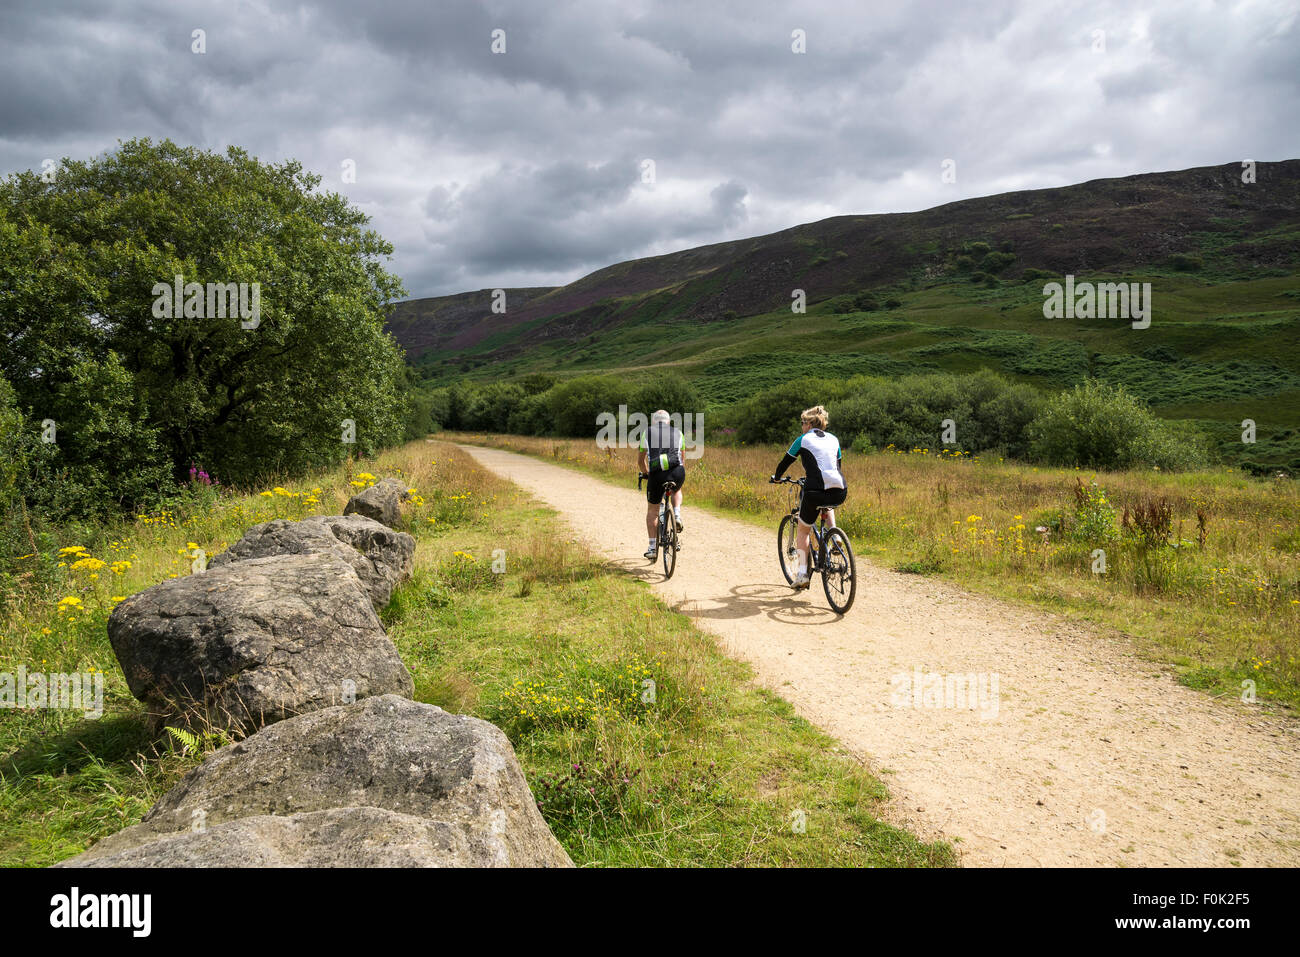 A couple cycling on the Longdendale trail in Derbyshire, England. A sunny summer day with hillsides of purple heather. Stock Photo